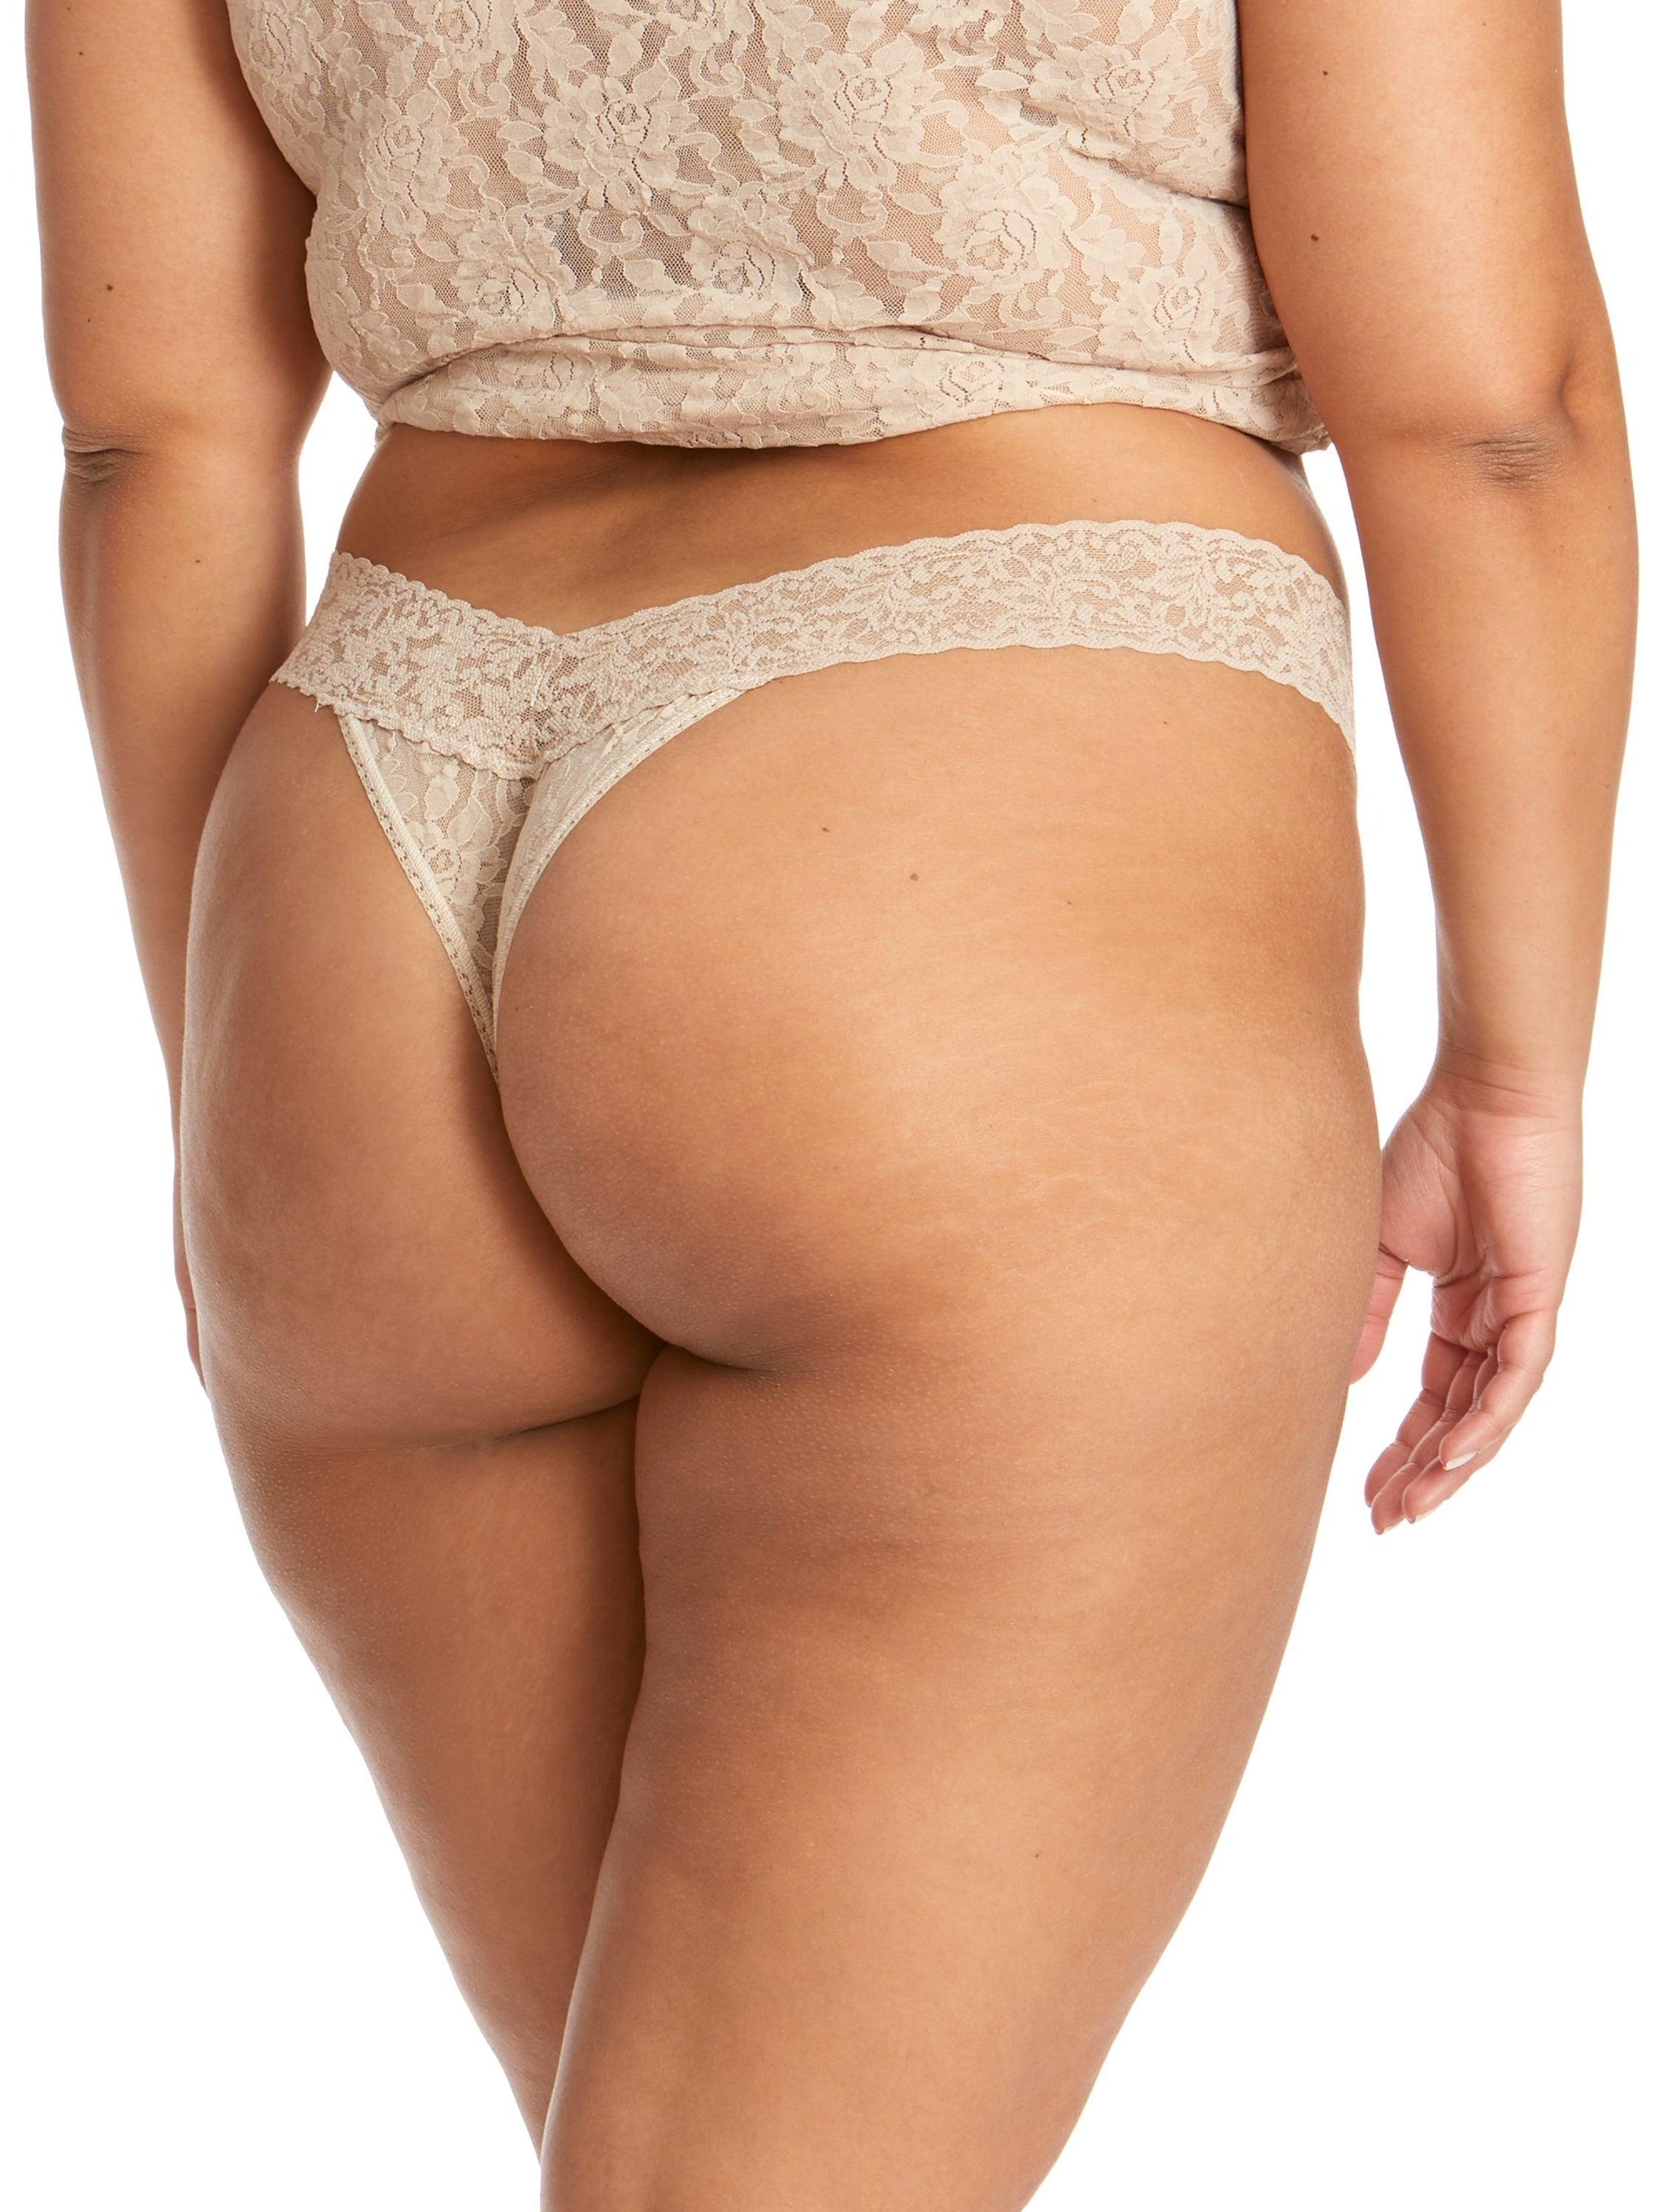 Chic Plus-Size Thong Lace Panties for All-Day Comfort